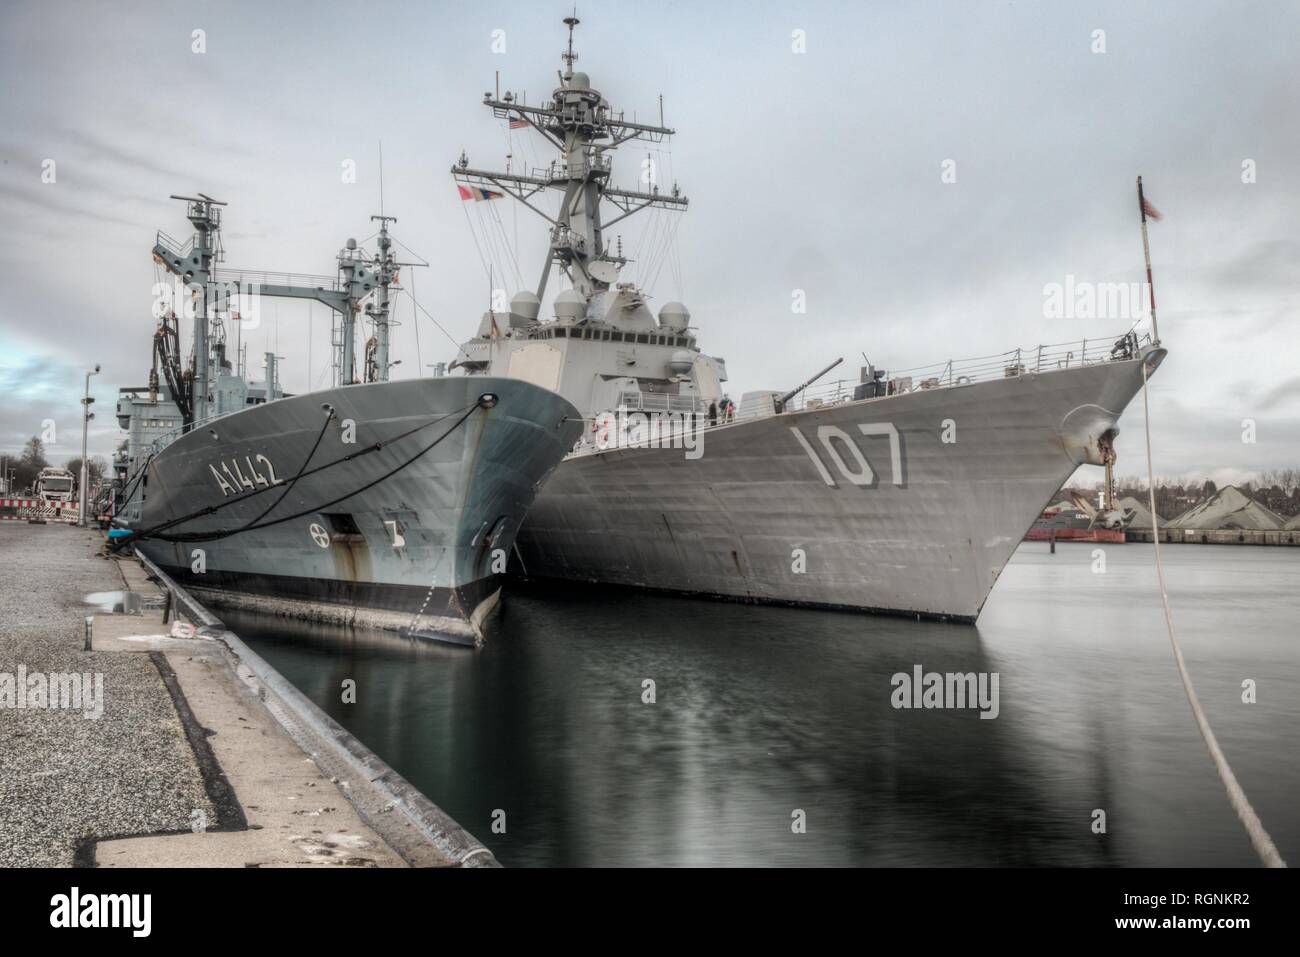 190126-N-EJ384-006 KIEL, Germany (Jan. 26, 2019) The guided-missile destroyer USS Gravely (DDG 107) is moored alongside the German navy Rhon-class tanker FGS Spessart (A1442) during a brief stop for fuel.  Gravely is underway to conduct maritime operations as the flagship of Standing NATO Maritime Group 1 providing a continuous maritime capability for NATO in the northern Atlantic. (U.S. Navy photo by Lt. Lyndsi Gutierrez/Released) Stock Photo